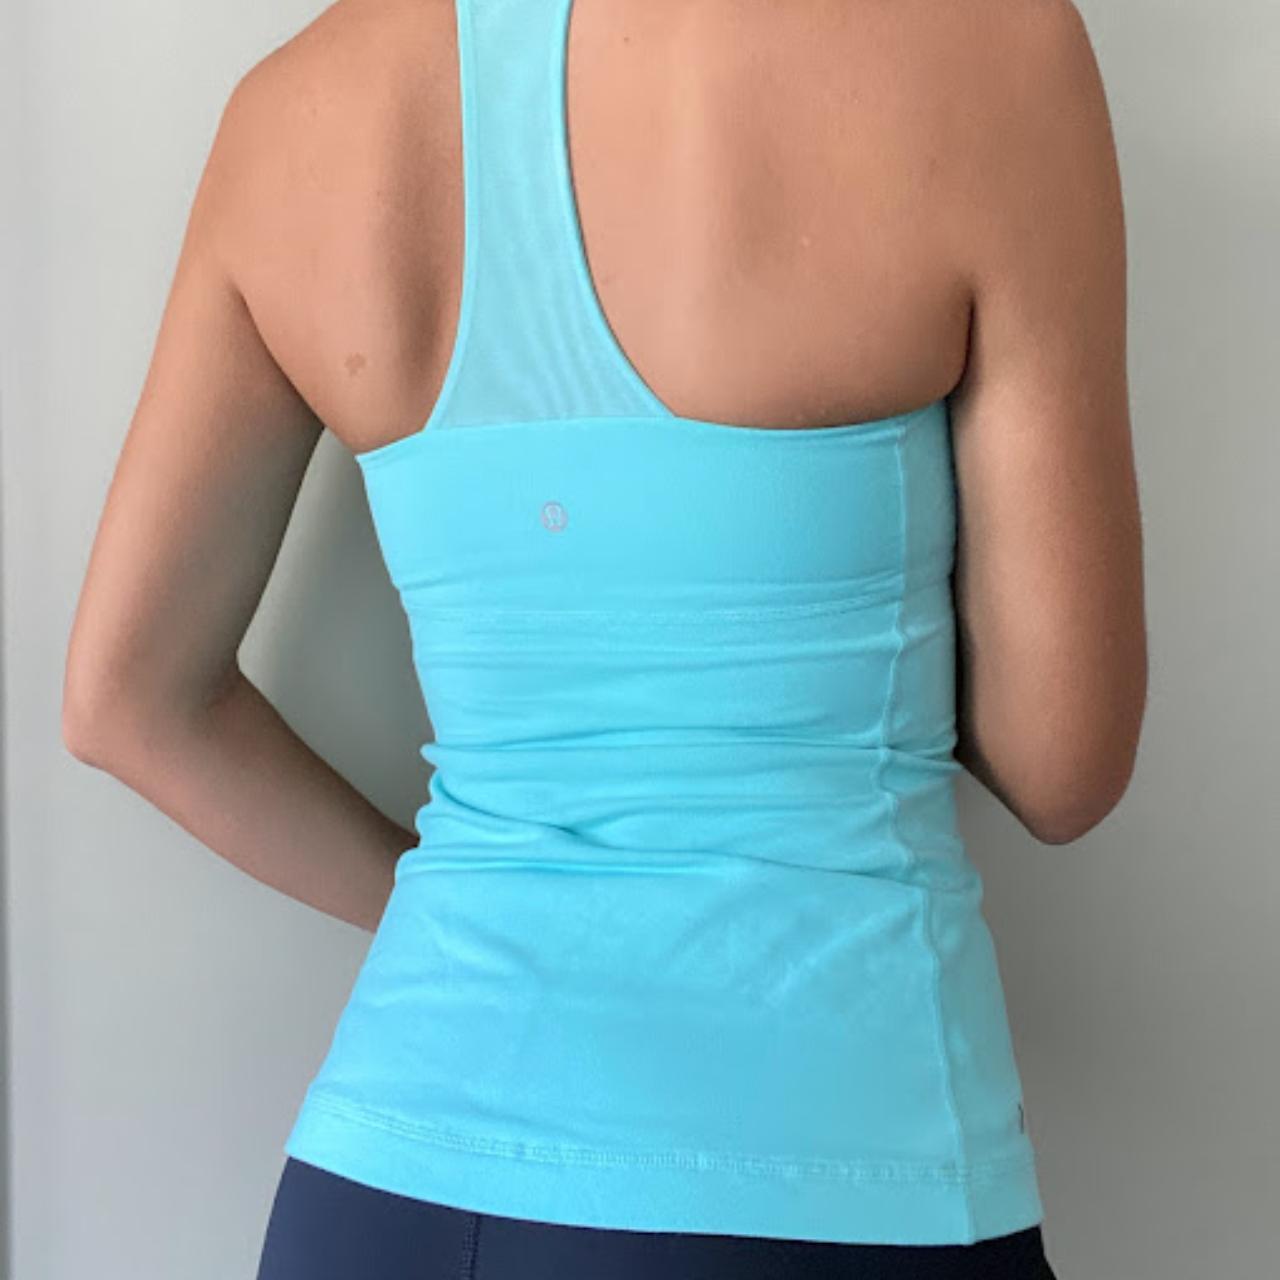 Womens Lululemon tank top, early 2000s vibes, in